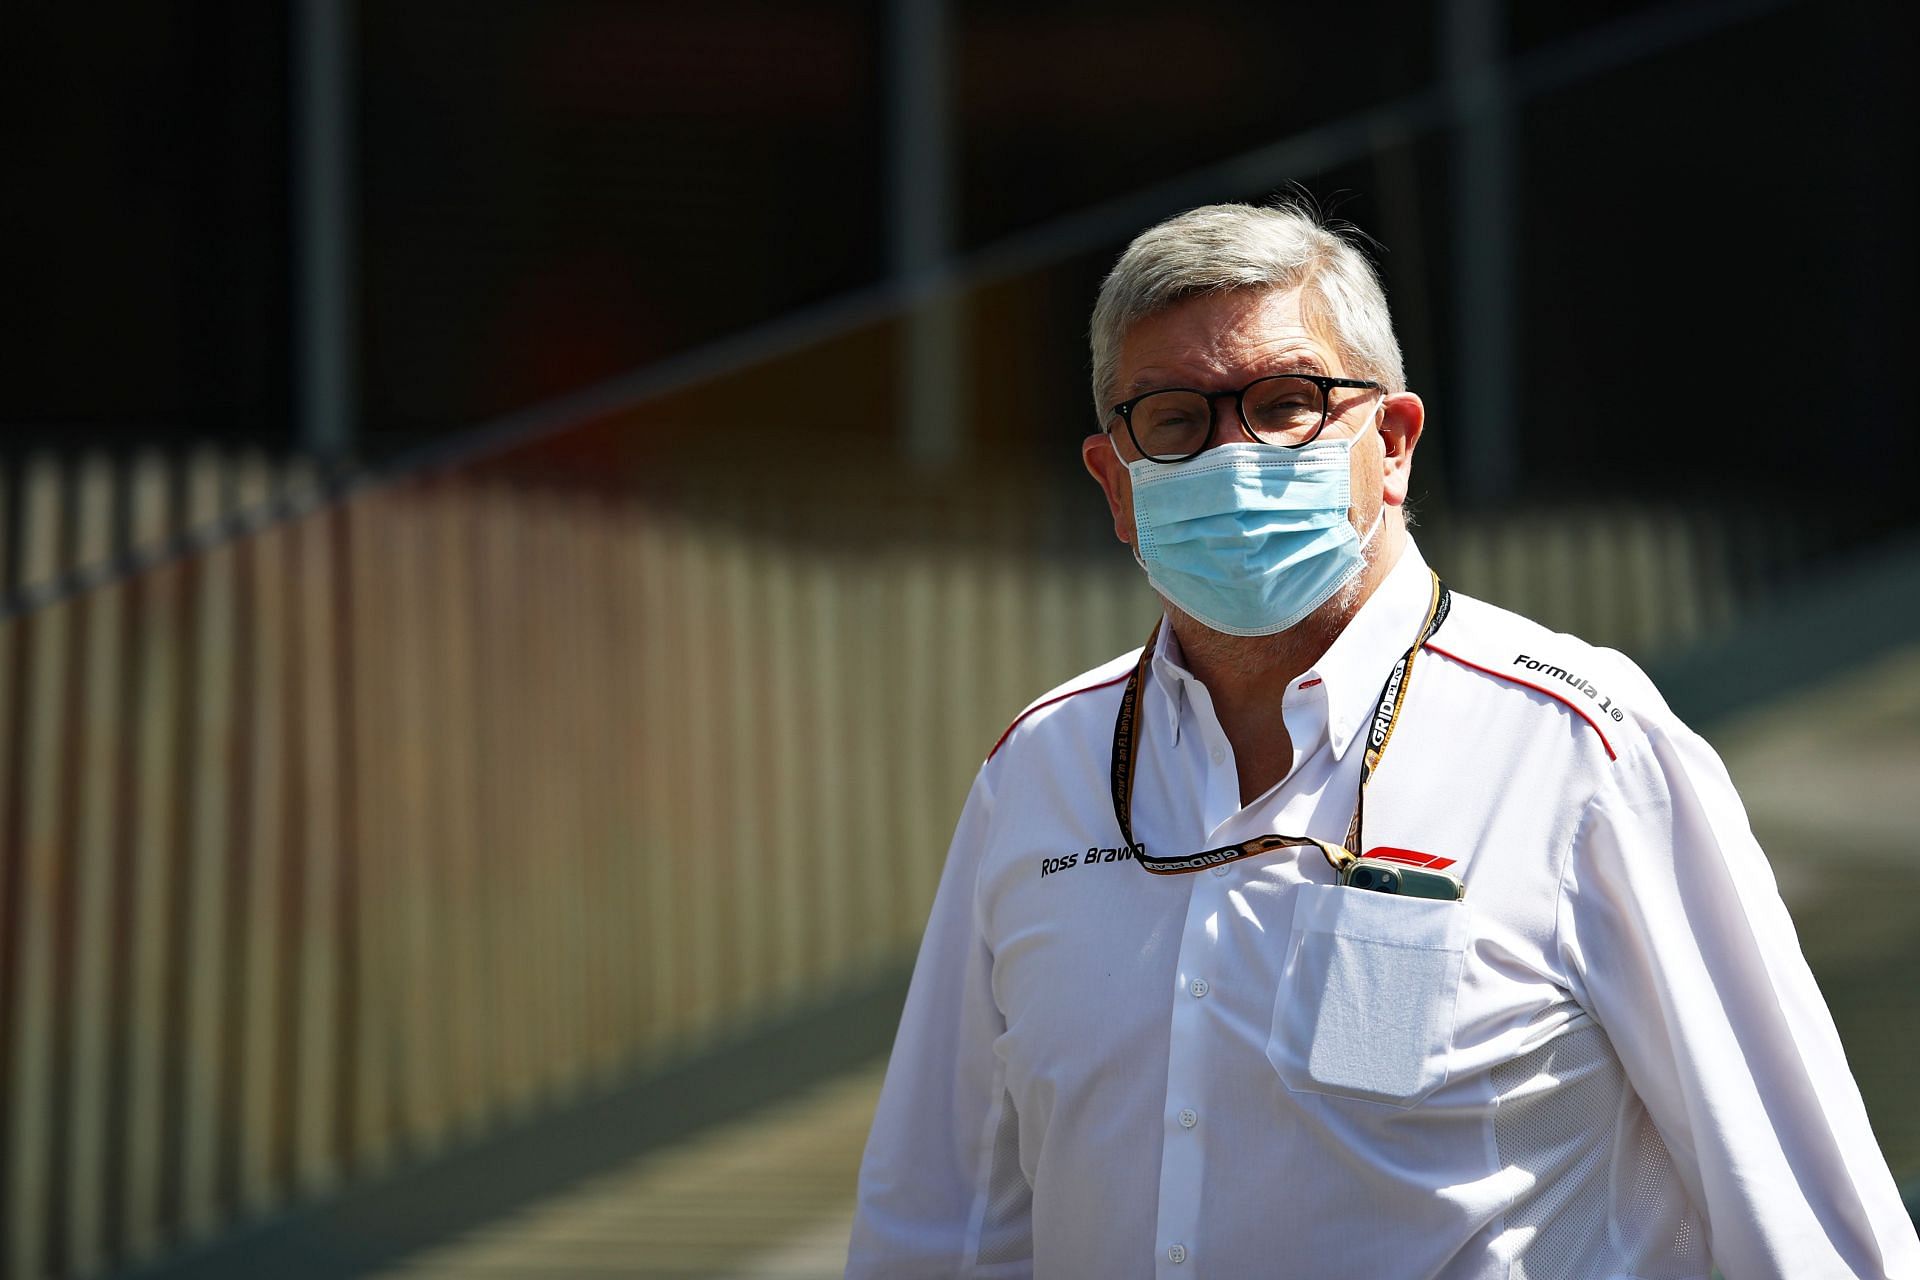 Ross Brawn, Managing Director (Sporting) of the F1 Group looks on in the paddock in Austria. (Photo by Mark Thompson/Getty Images)